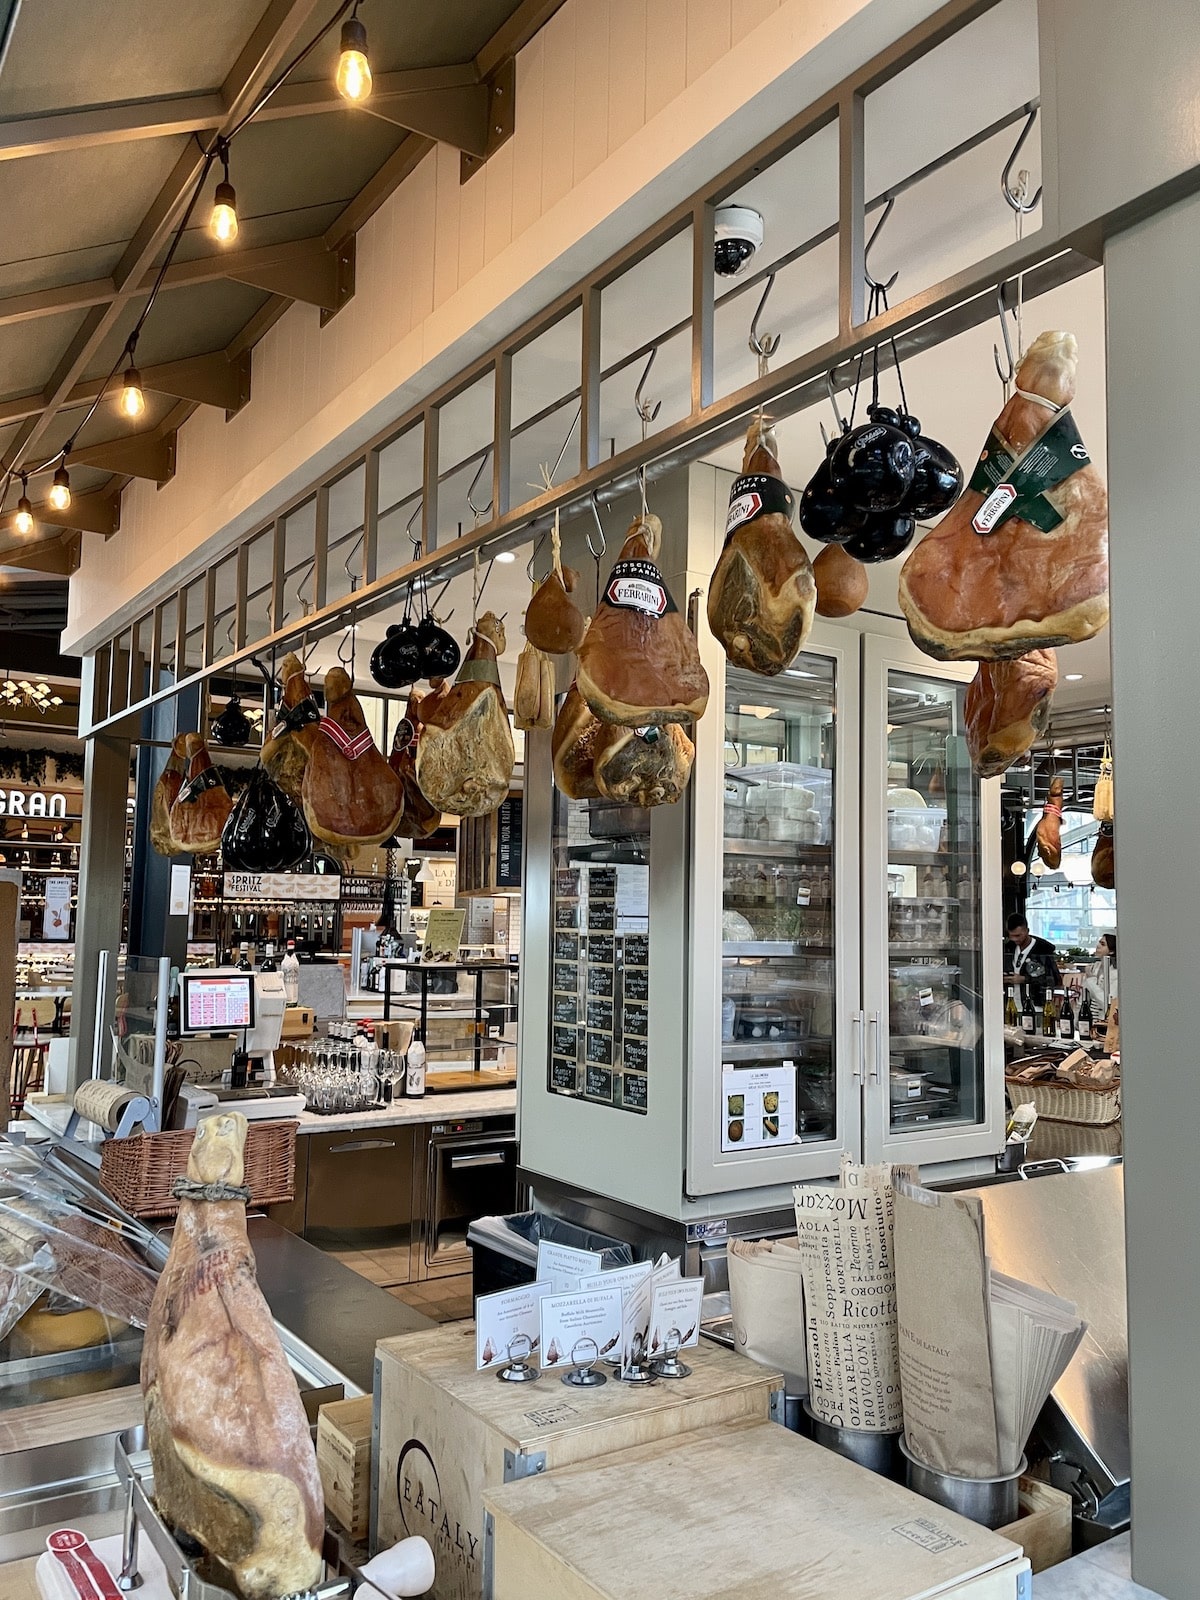 Italian meat counter with meats hanging from above.